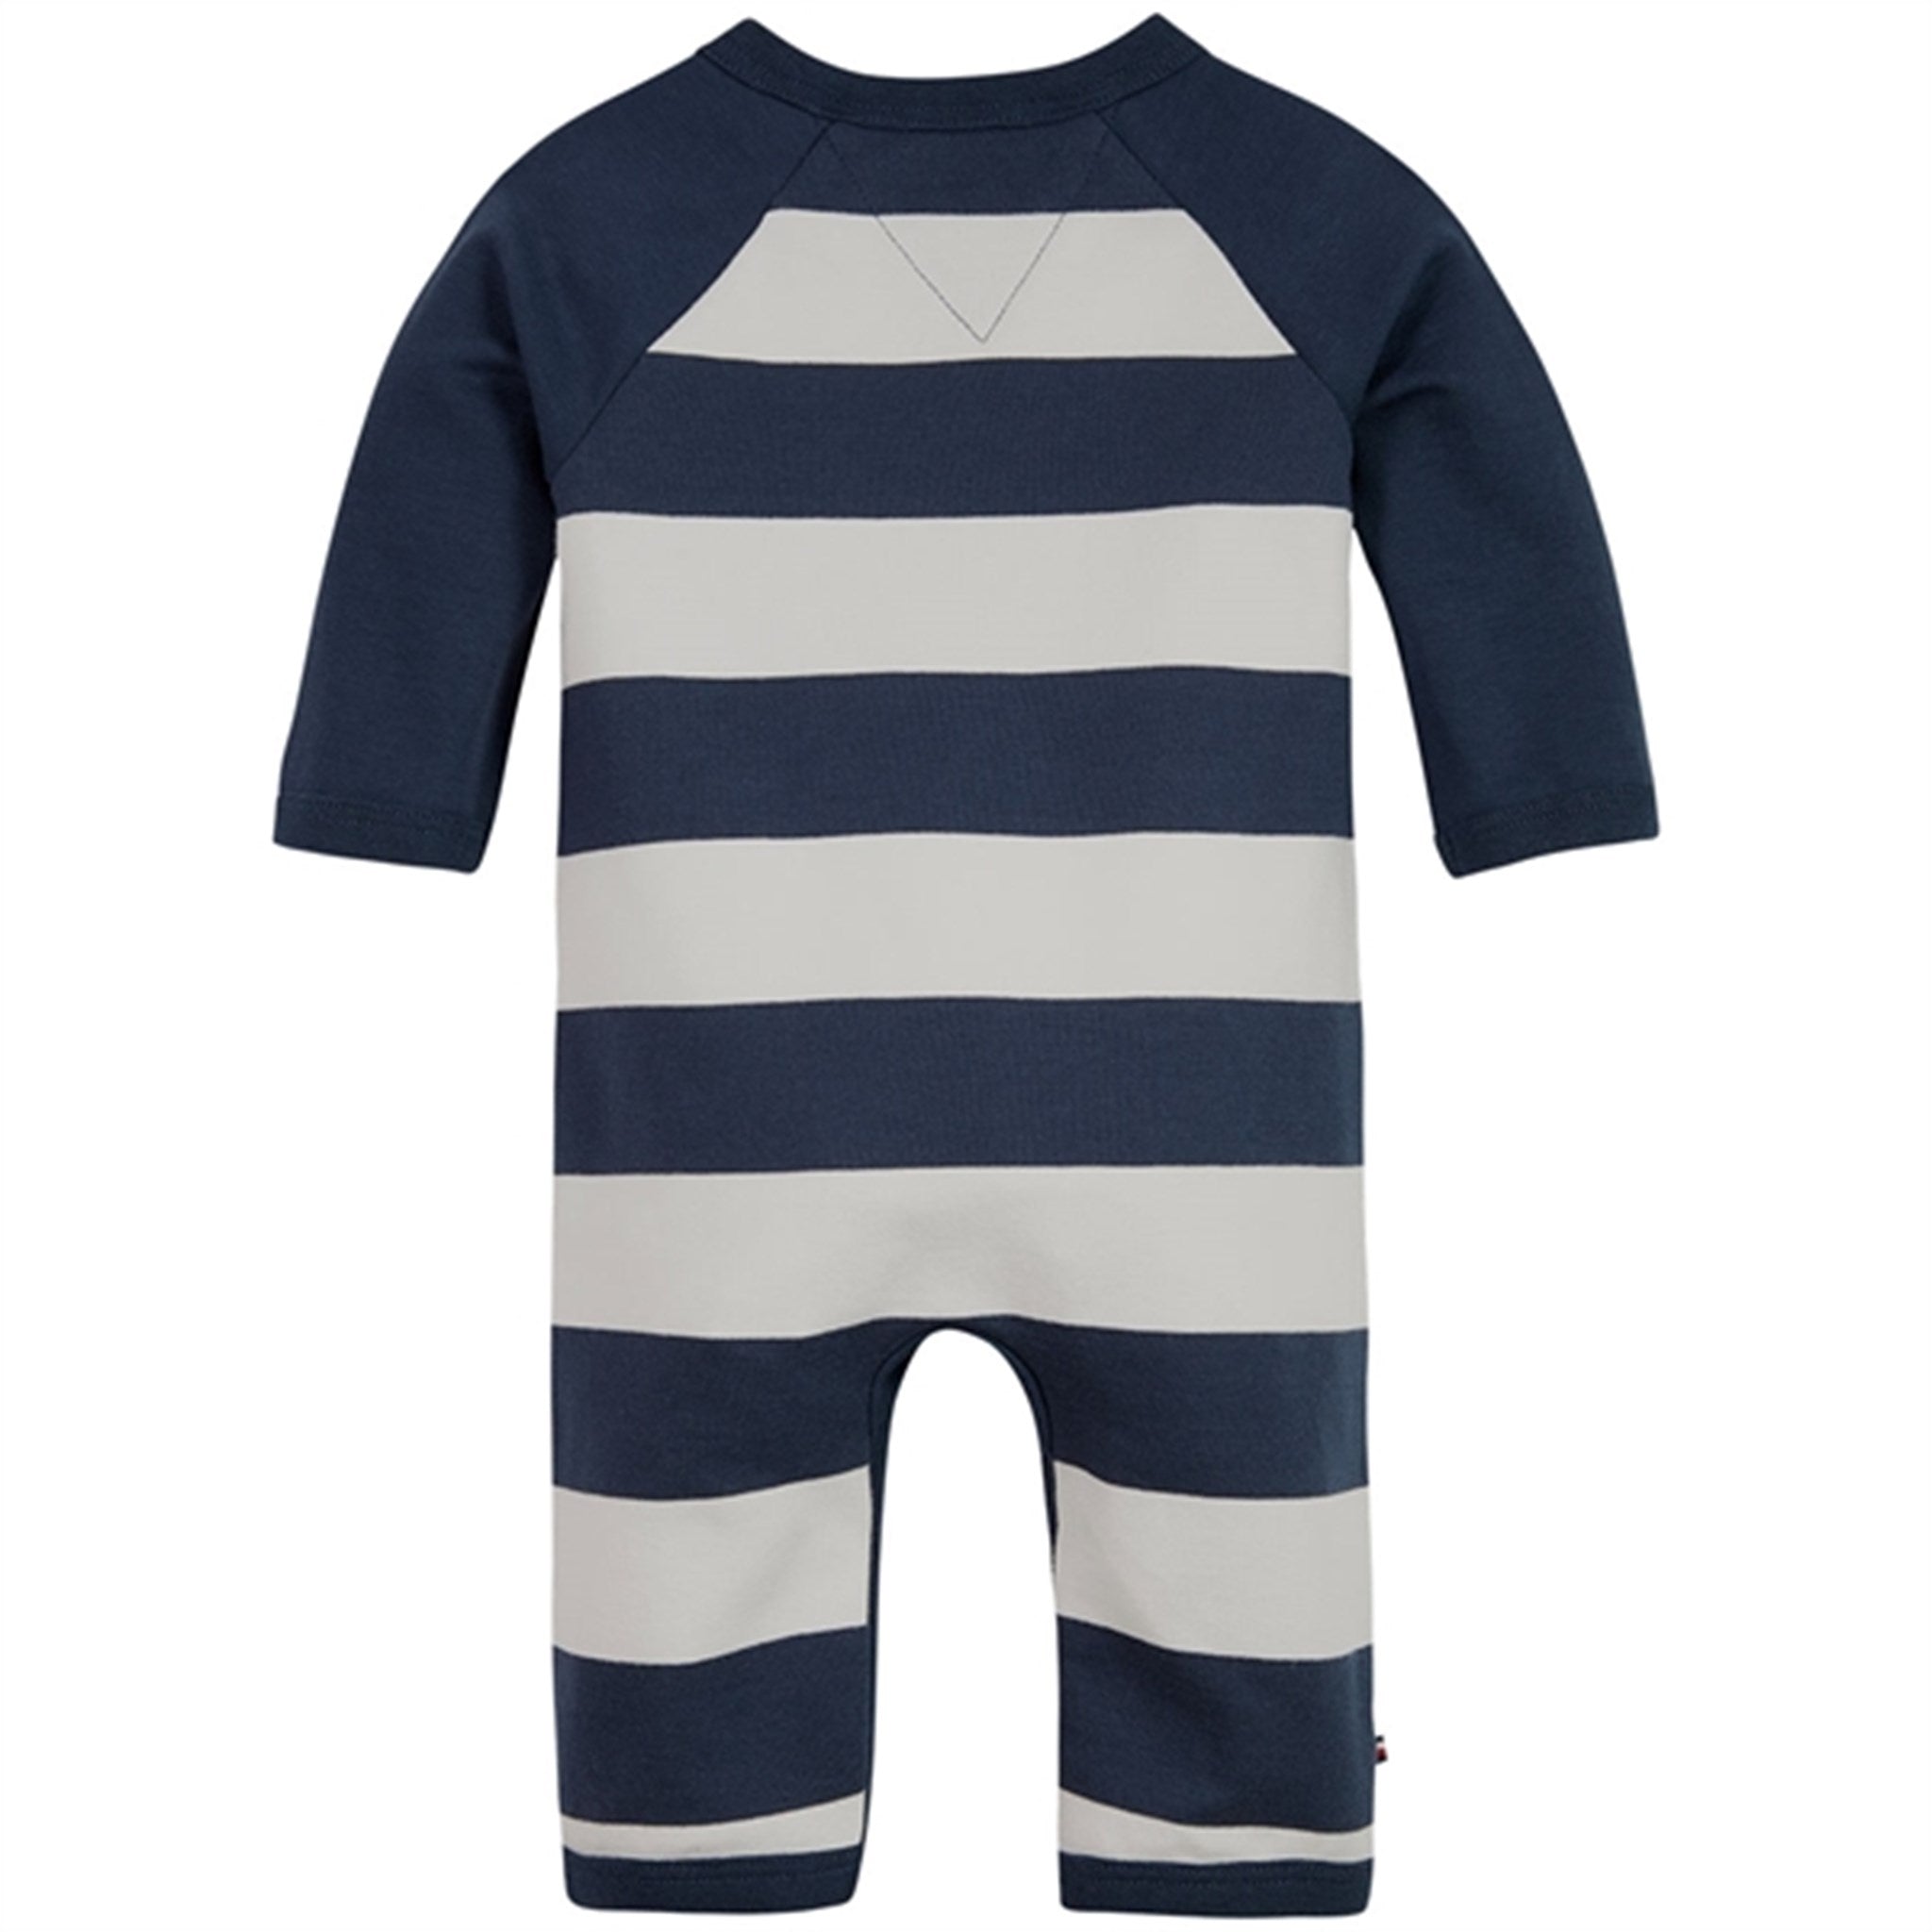 Tommy Hilfiger Baby Rugby Stripe Coverall Twilight Navy Stripe 3